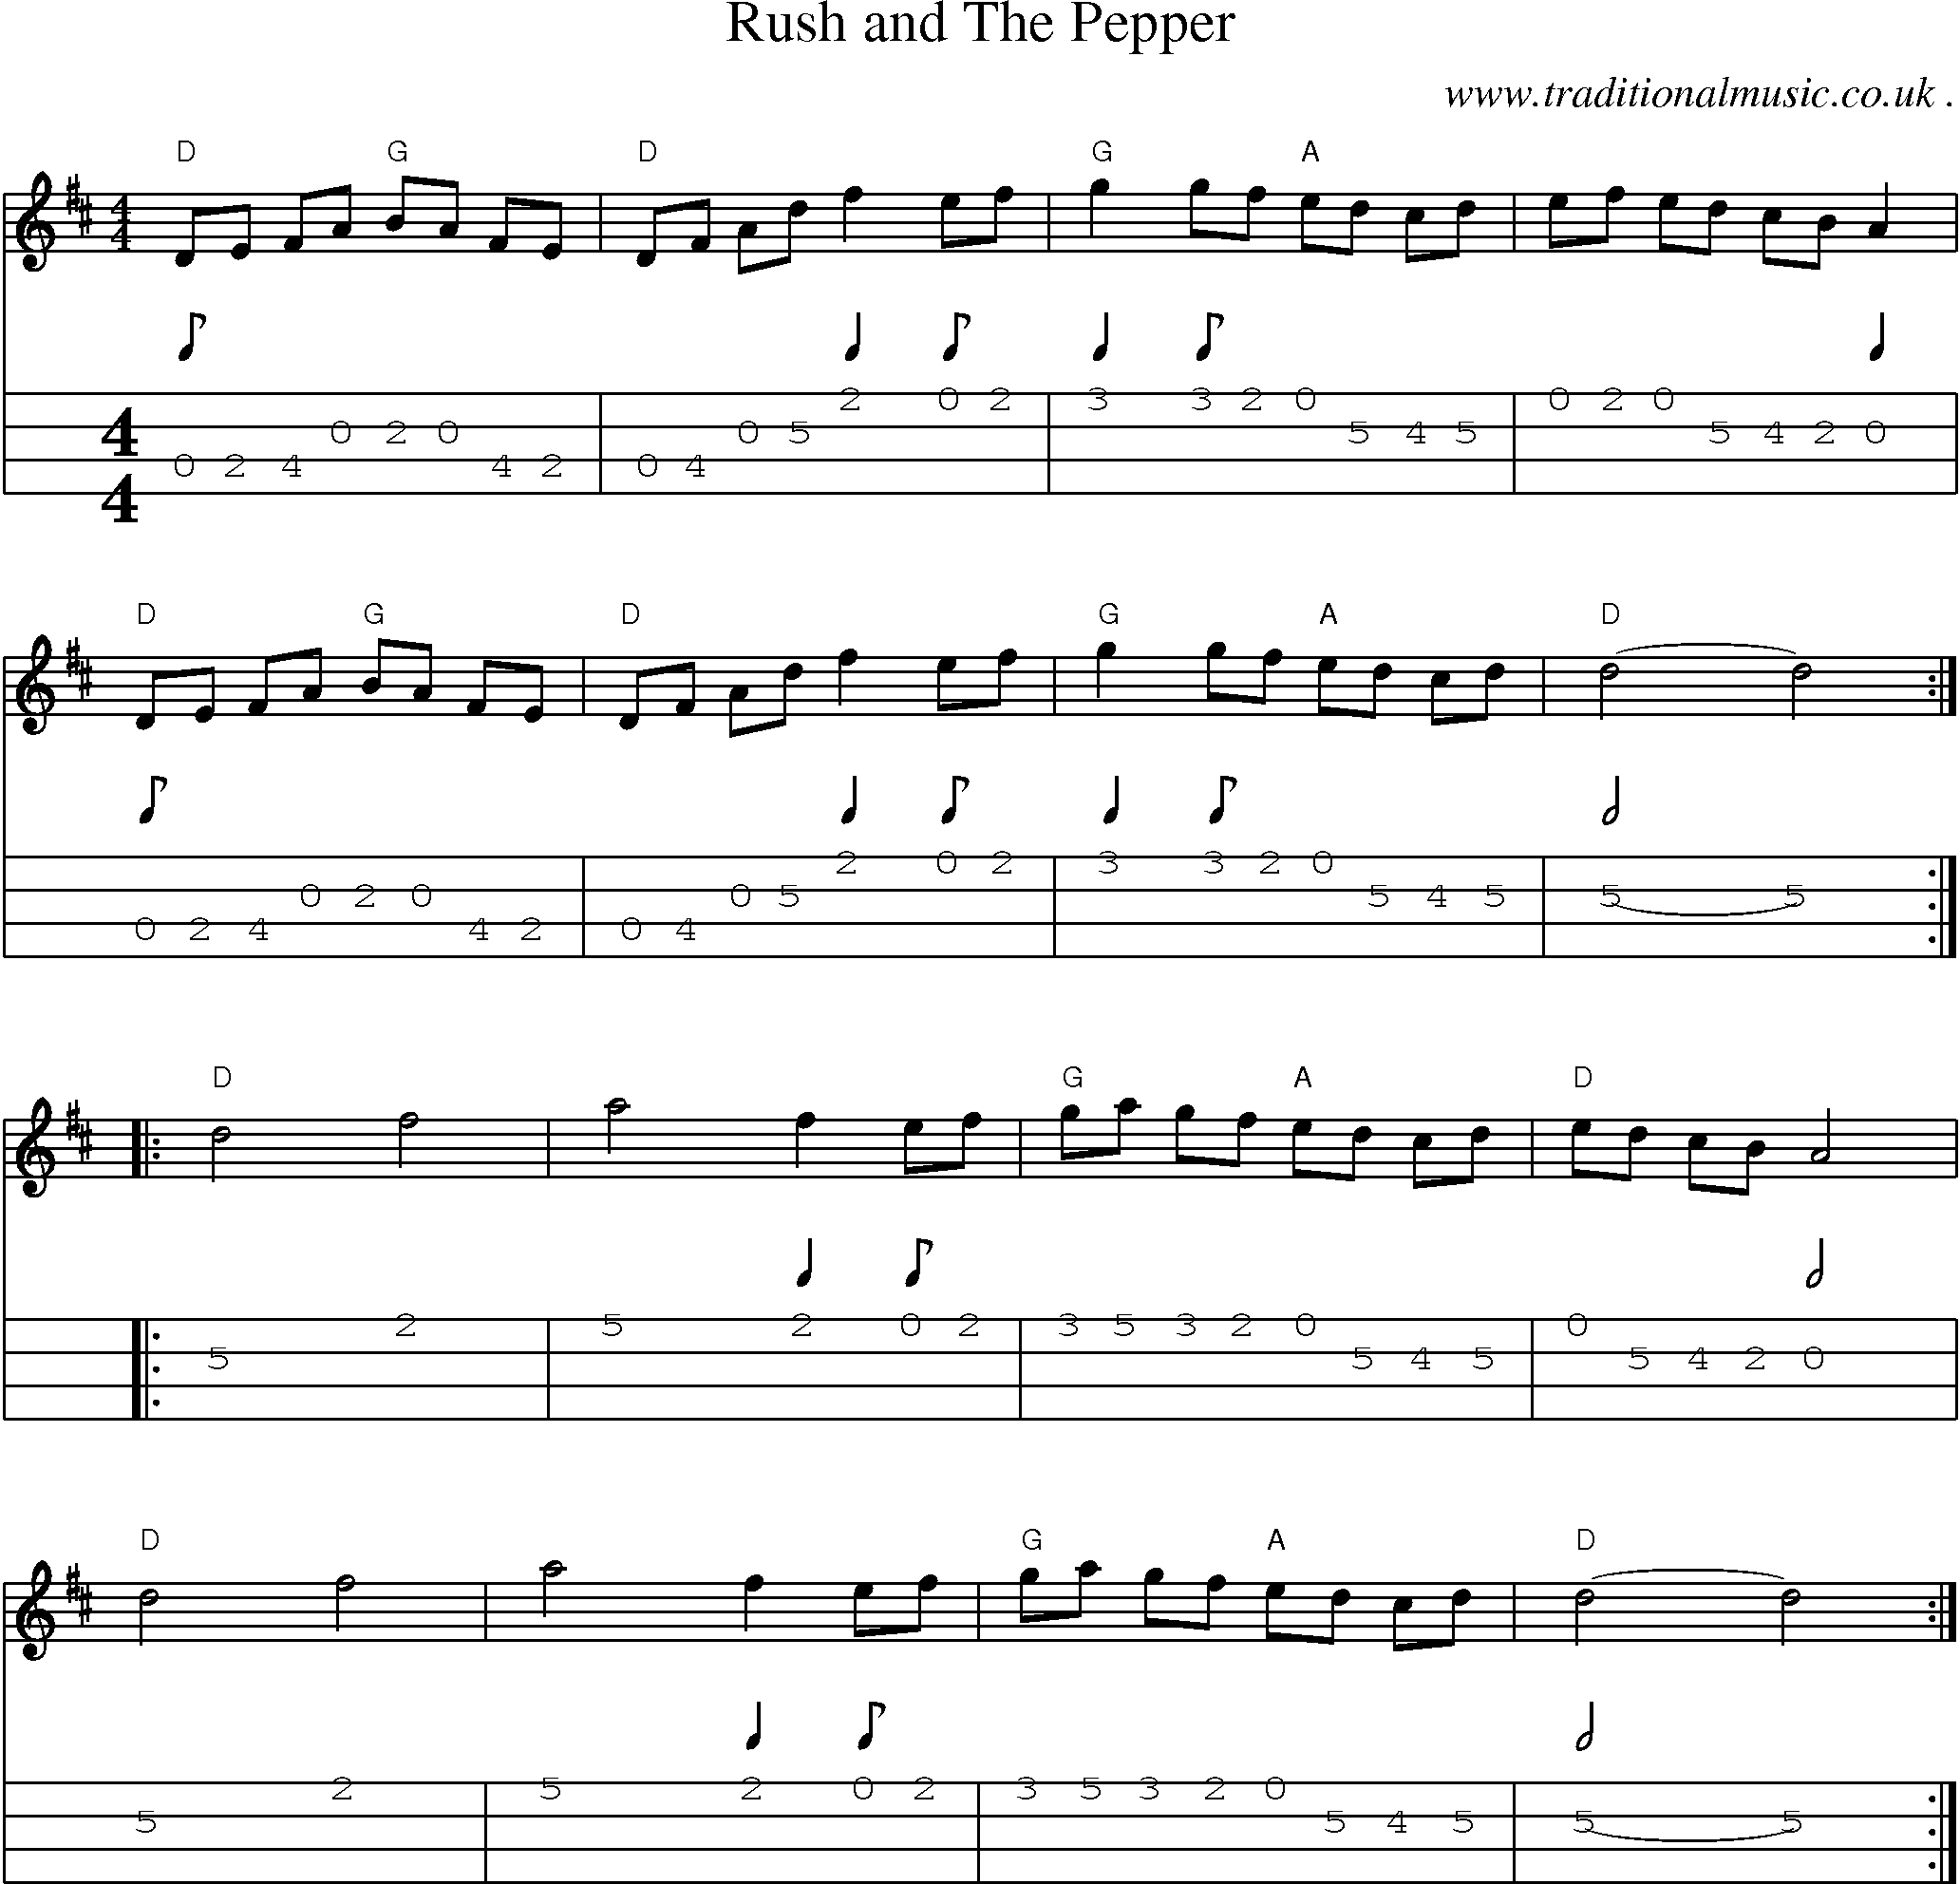 Music Score and Guitar Tabs for Rush And The Pepper